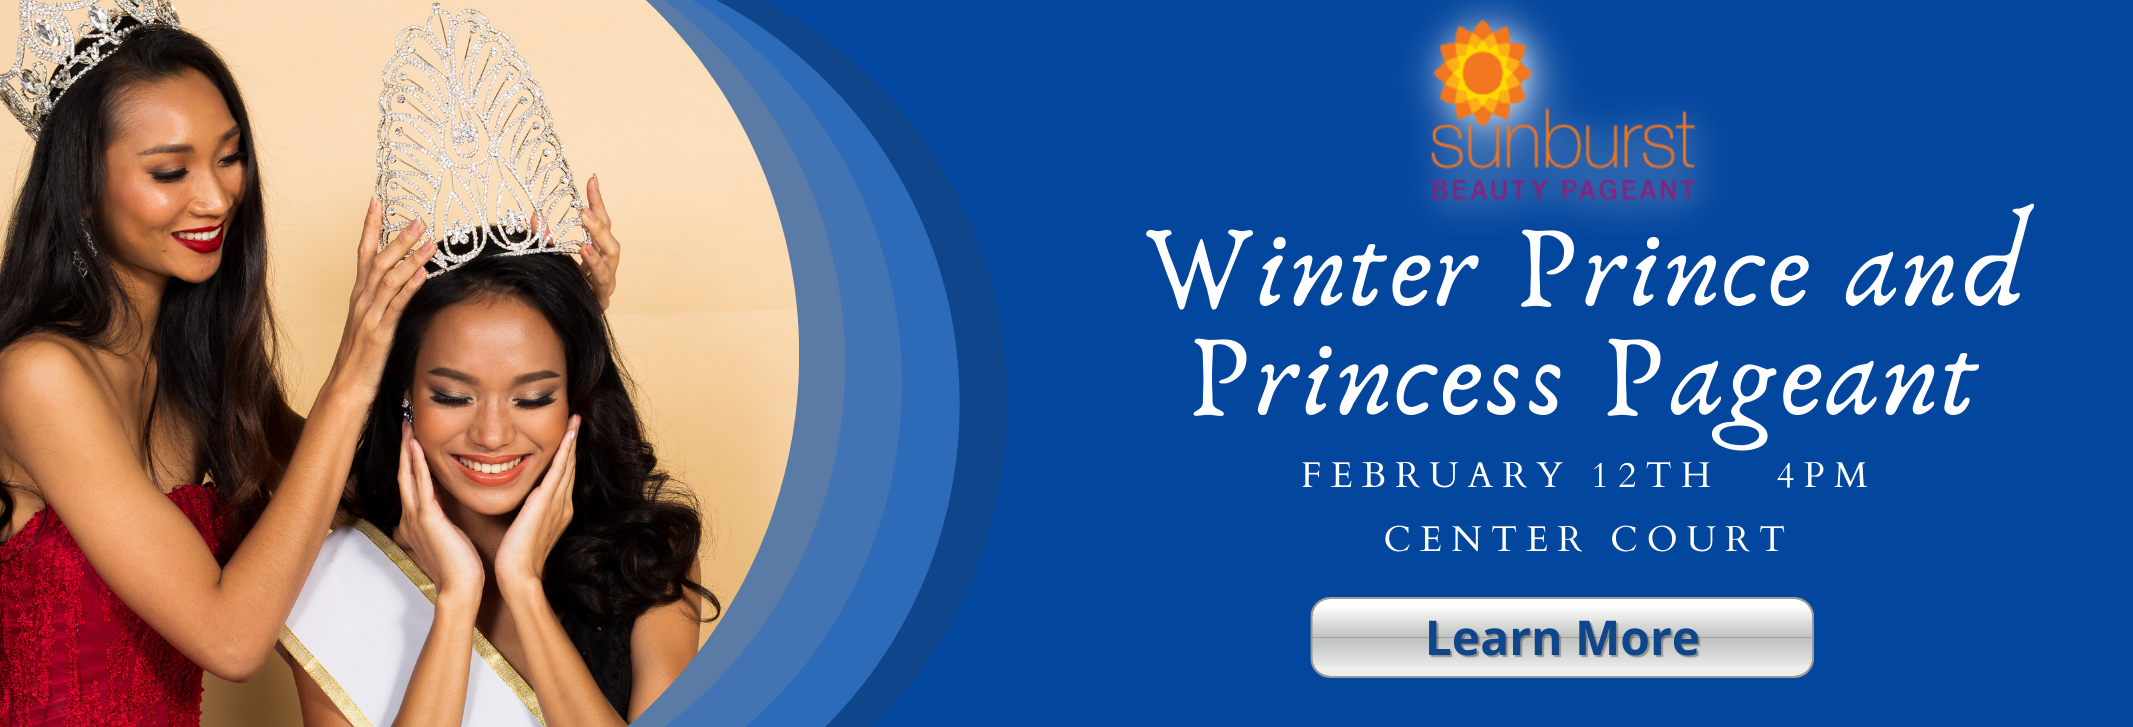 Winter Prince and Princess Pageant